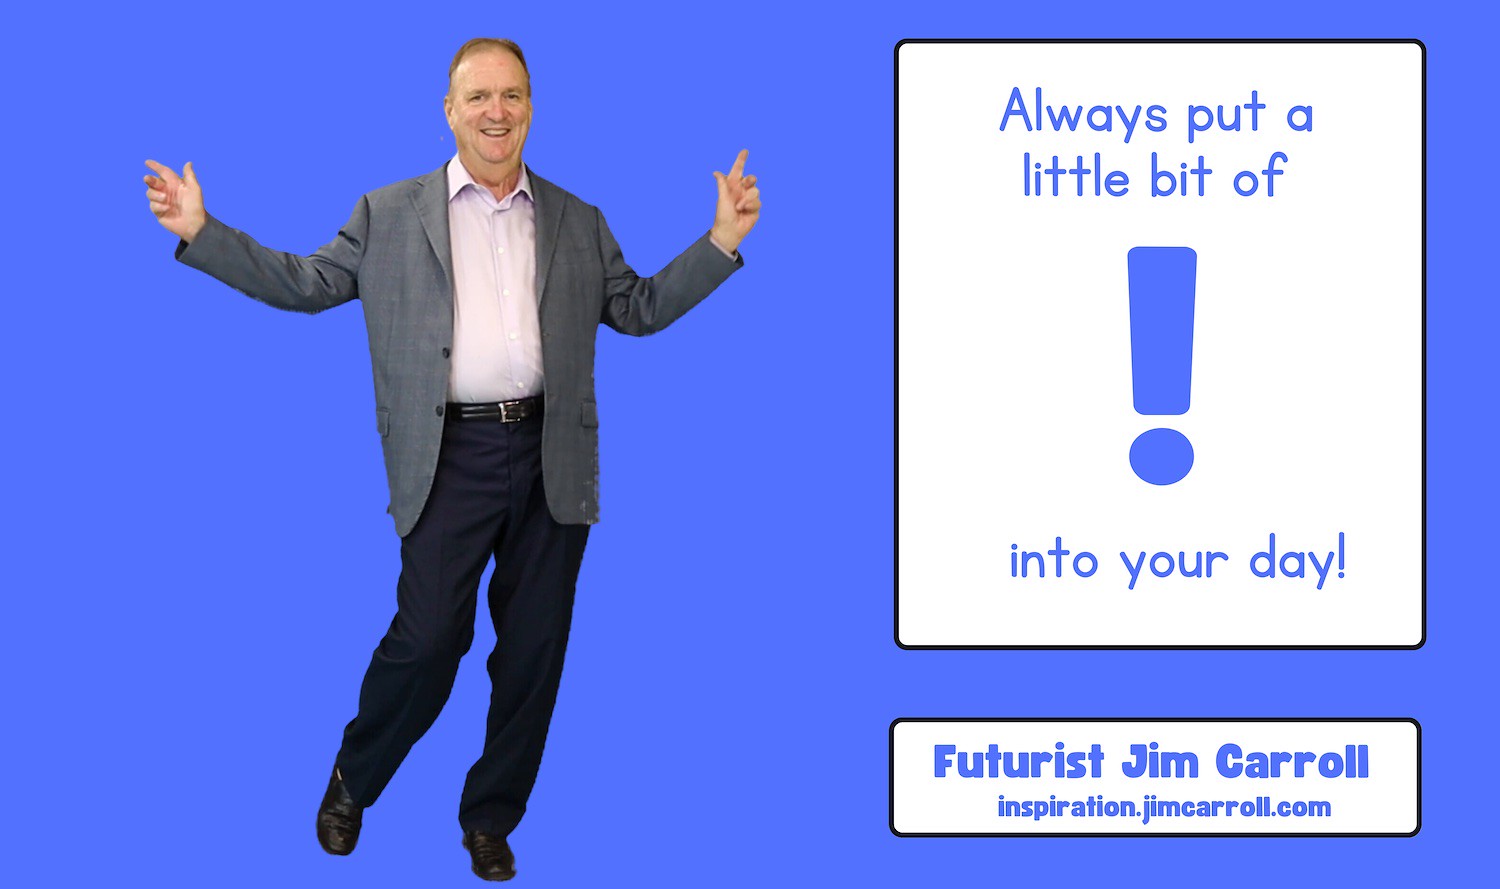 "Always put a little bit of ! into your day!" - Futurist Jim Carroll